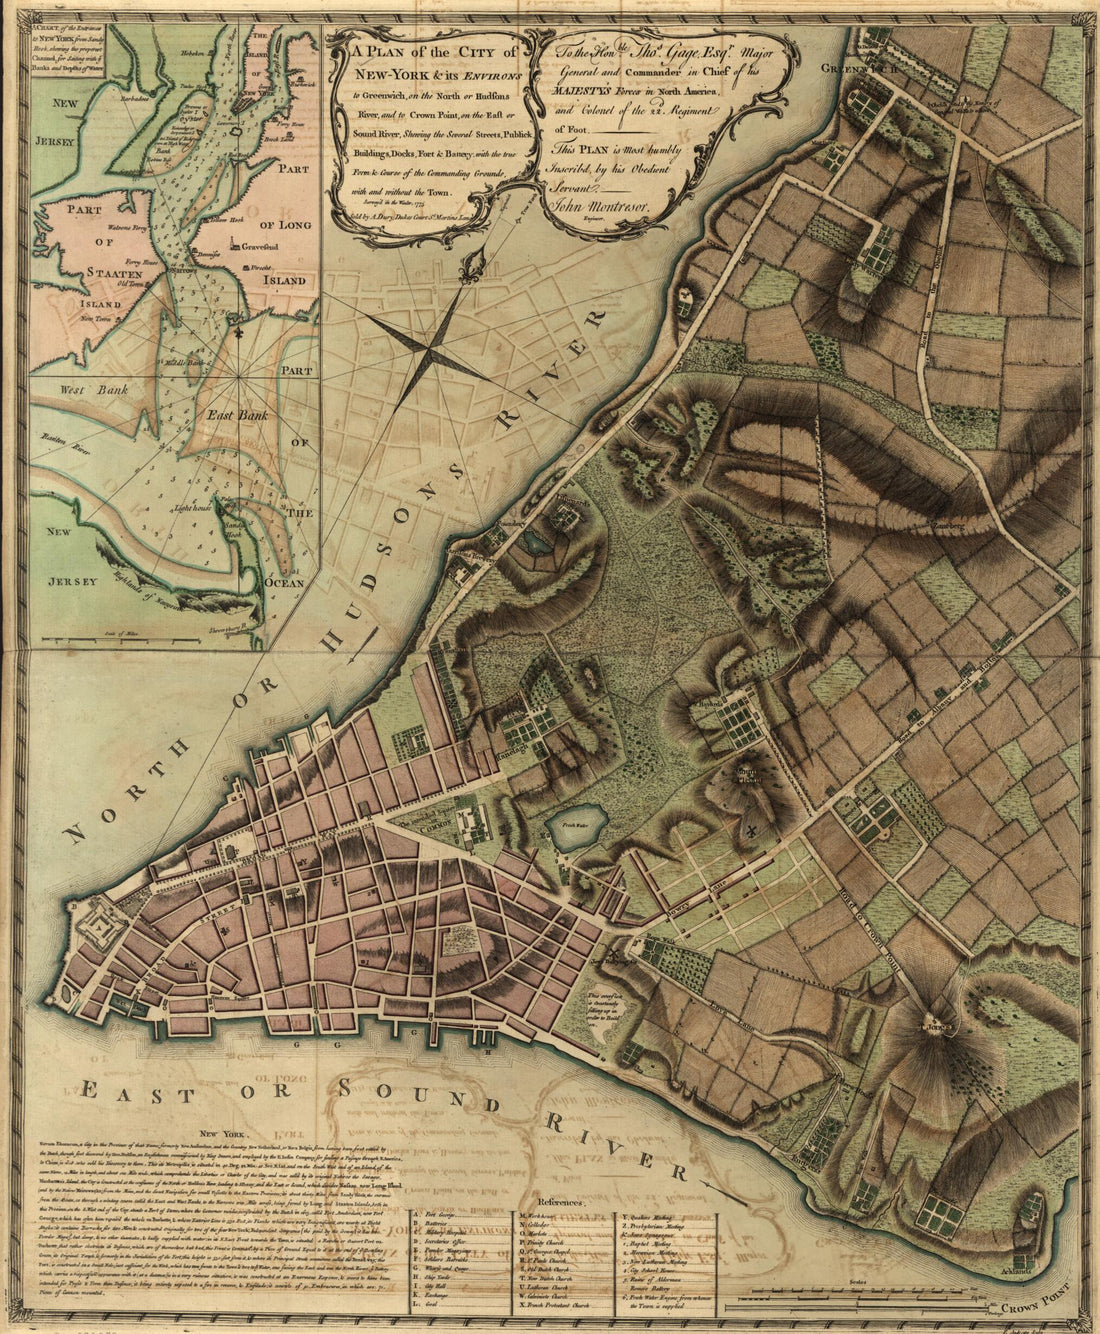 This old map of York &amp; Its Environs to Greenwich, On the North Or Hudsons River, and to Crown Point, On the East Or Sound River, Shewing the Several Streets, Publick Buildings, Docks, Fort &amp; Battery, With the True Form &amp; Course of the Commanding Grounds,